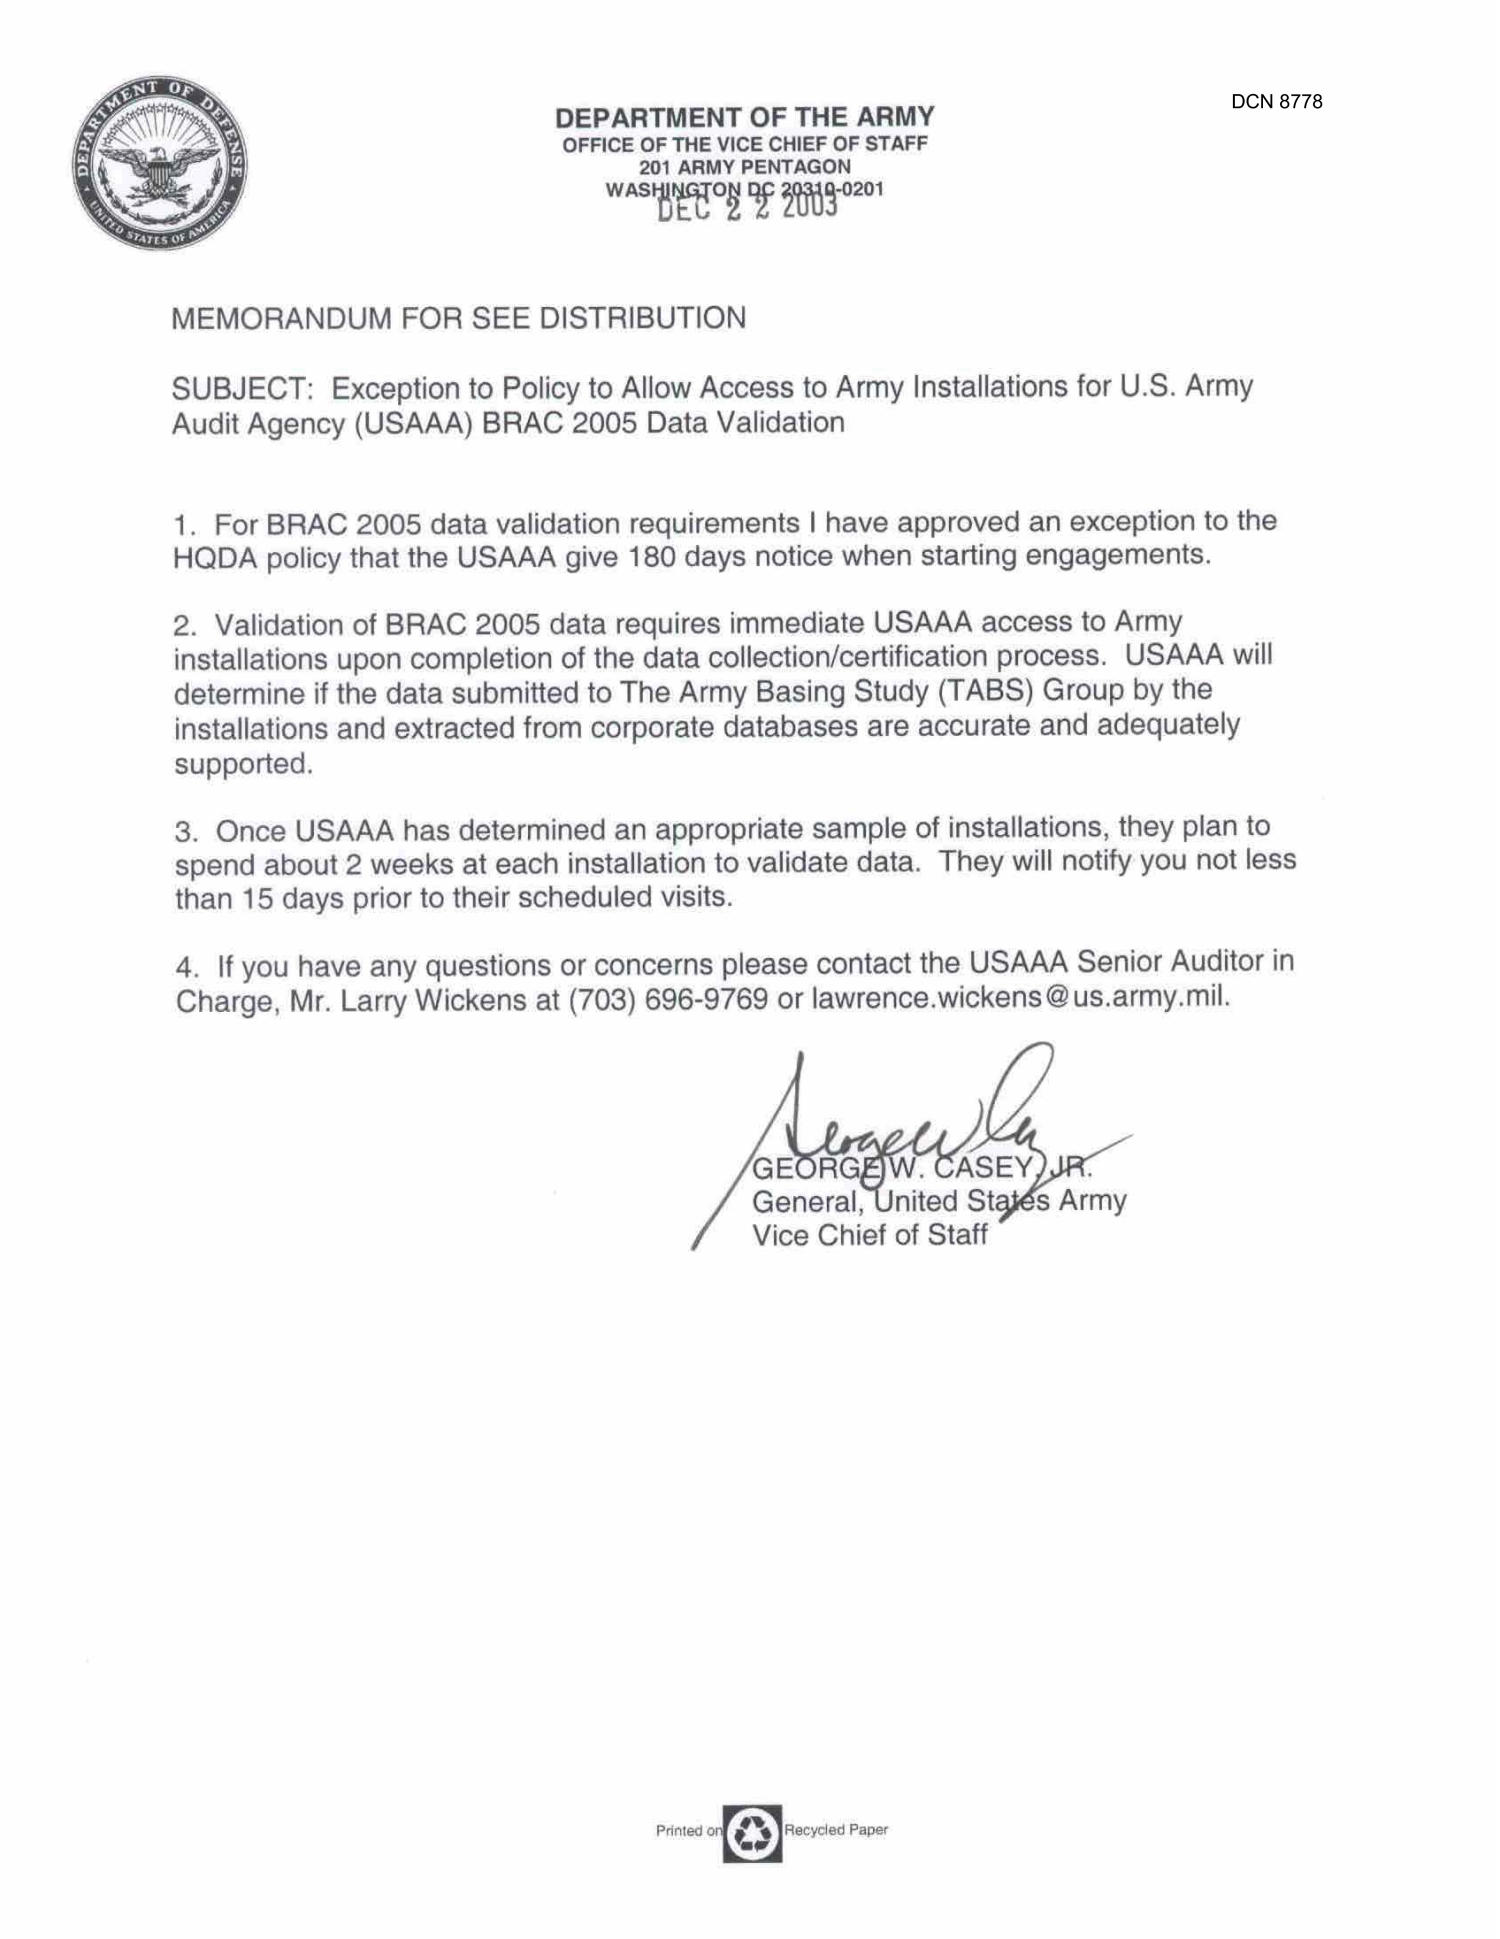 Dept of the Army Auditing Docs, Memo "Exception to Policy to Allow